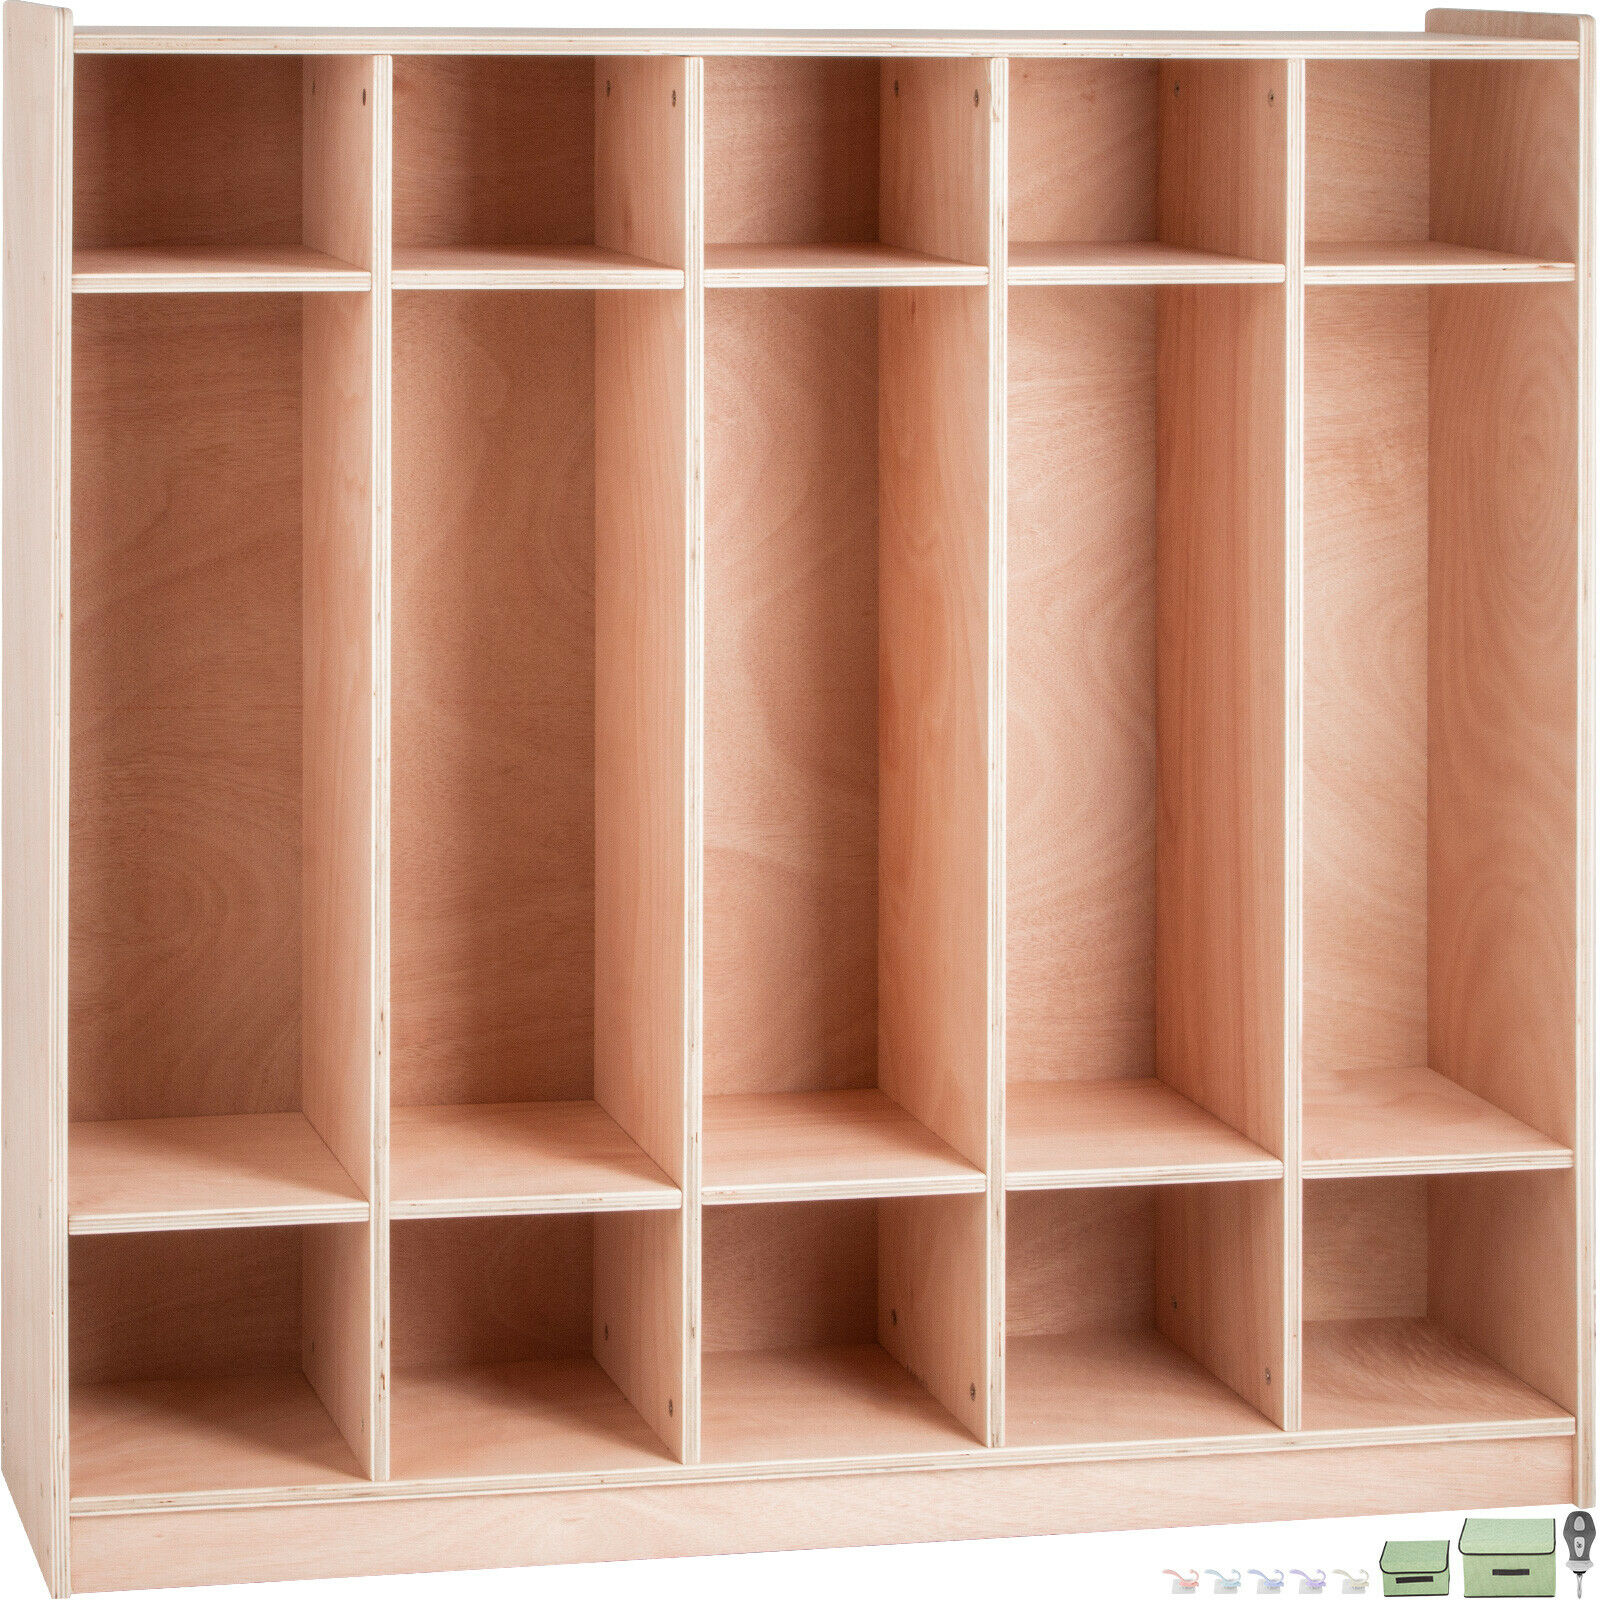 Classroom Storage Cabinet,8 Grids,Home